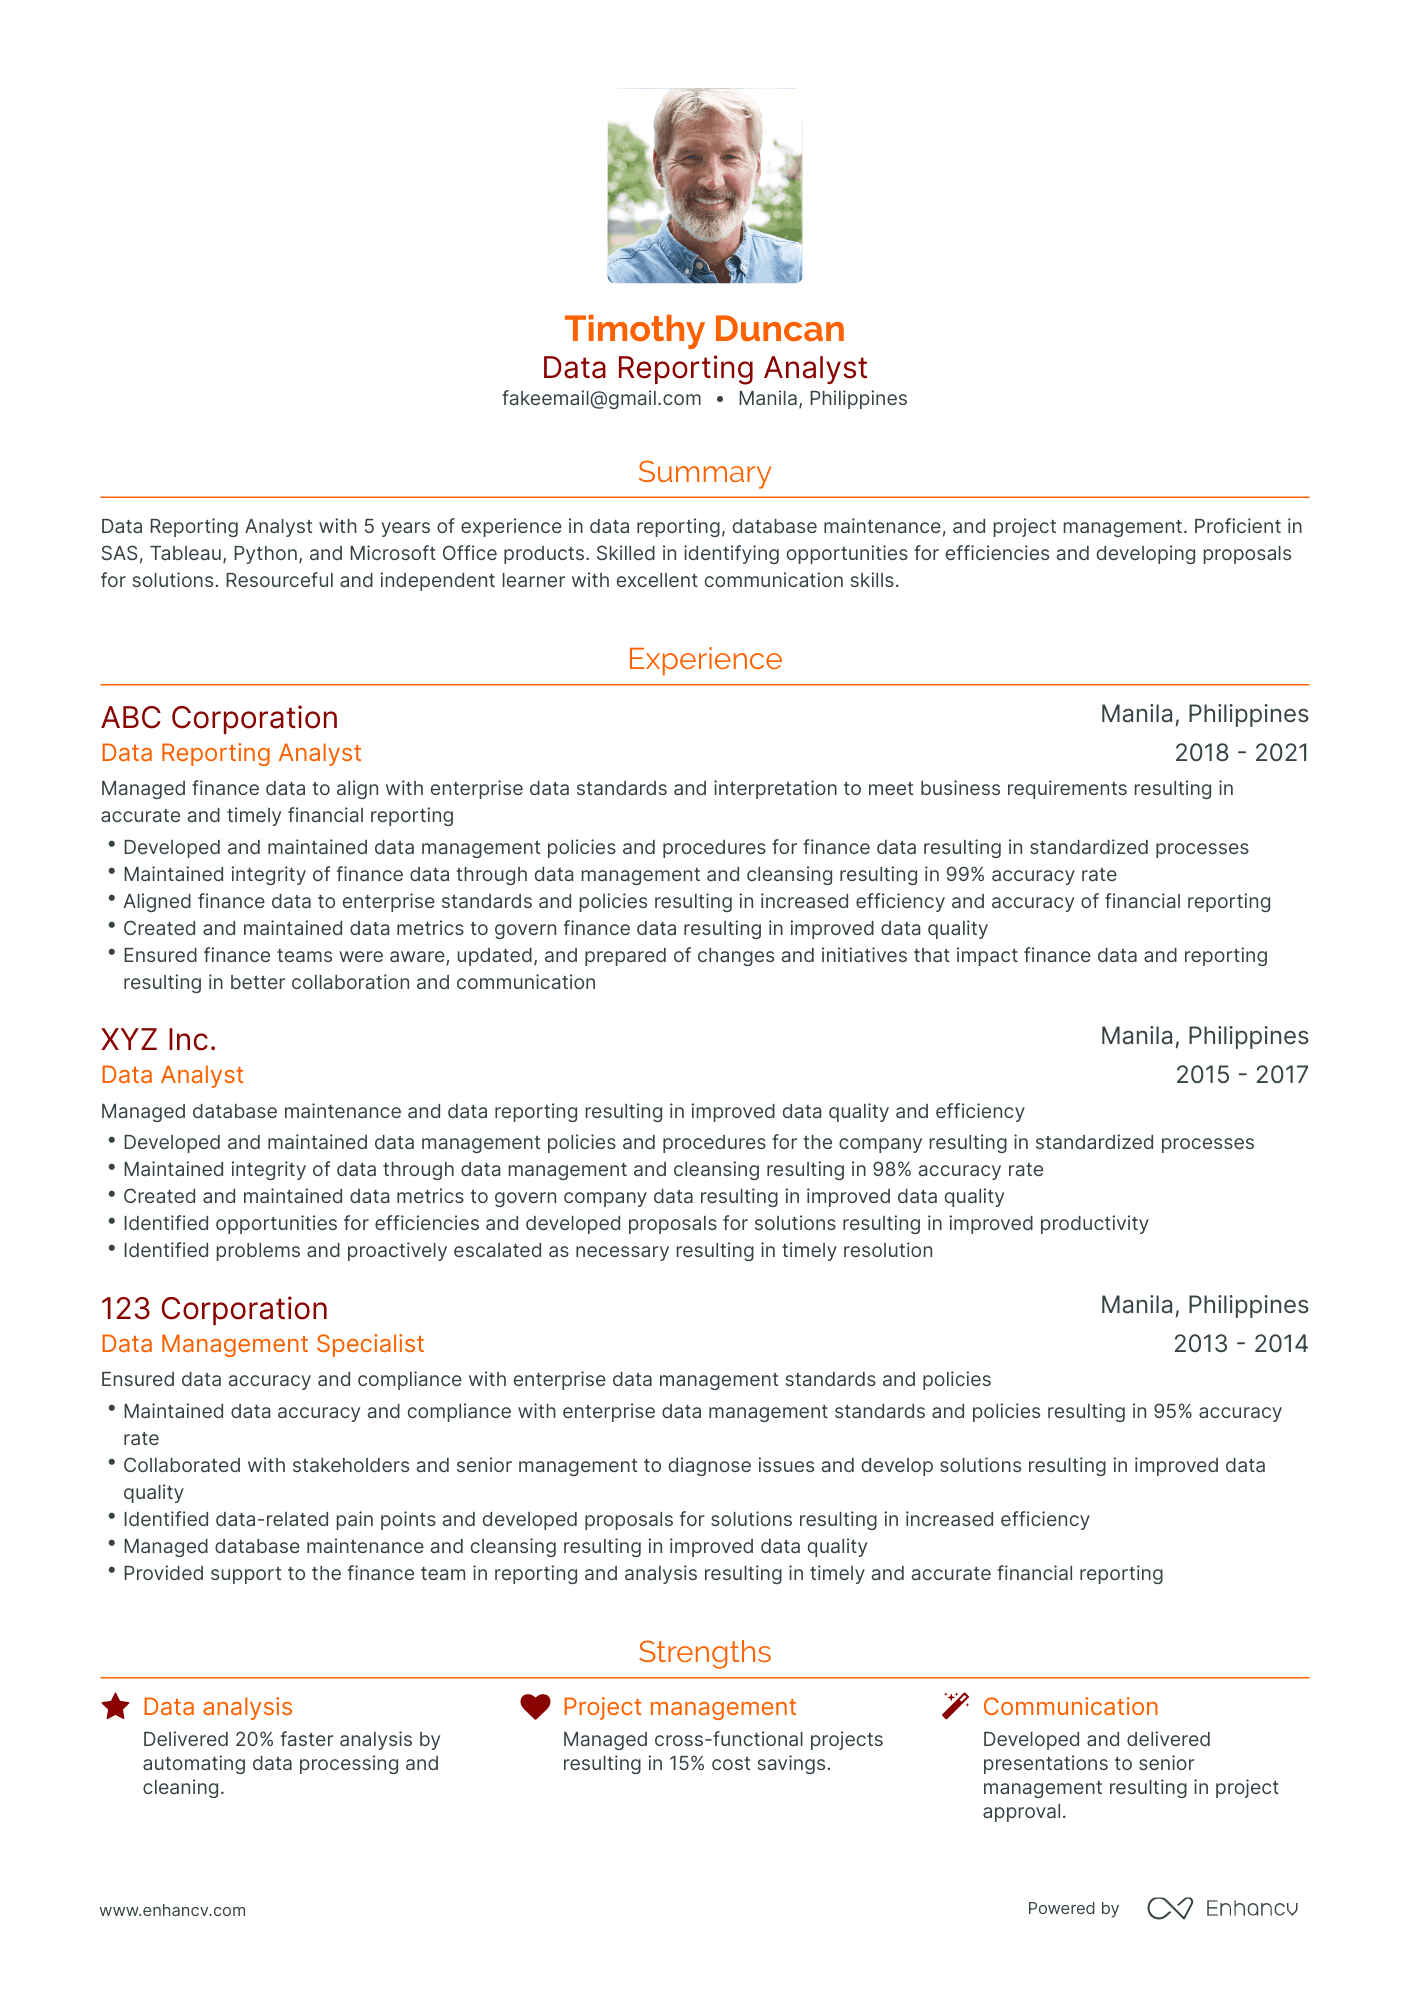 Traditional Data Reporting Analyst Resume Template